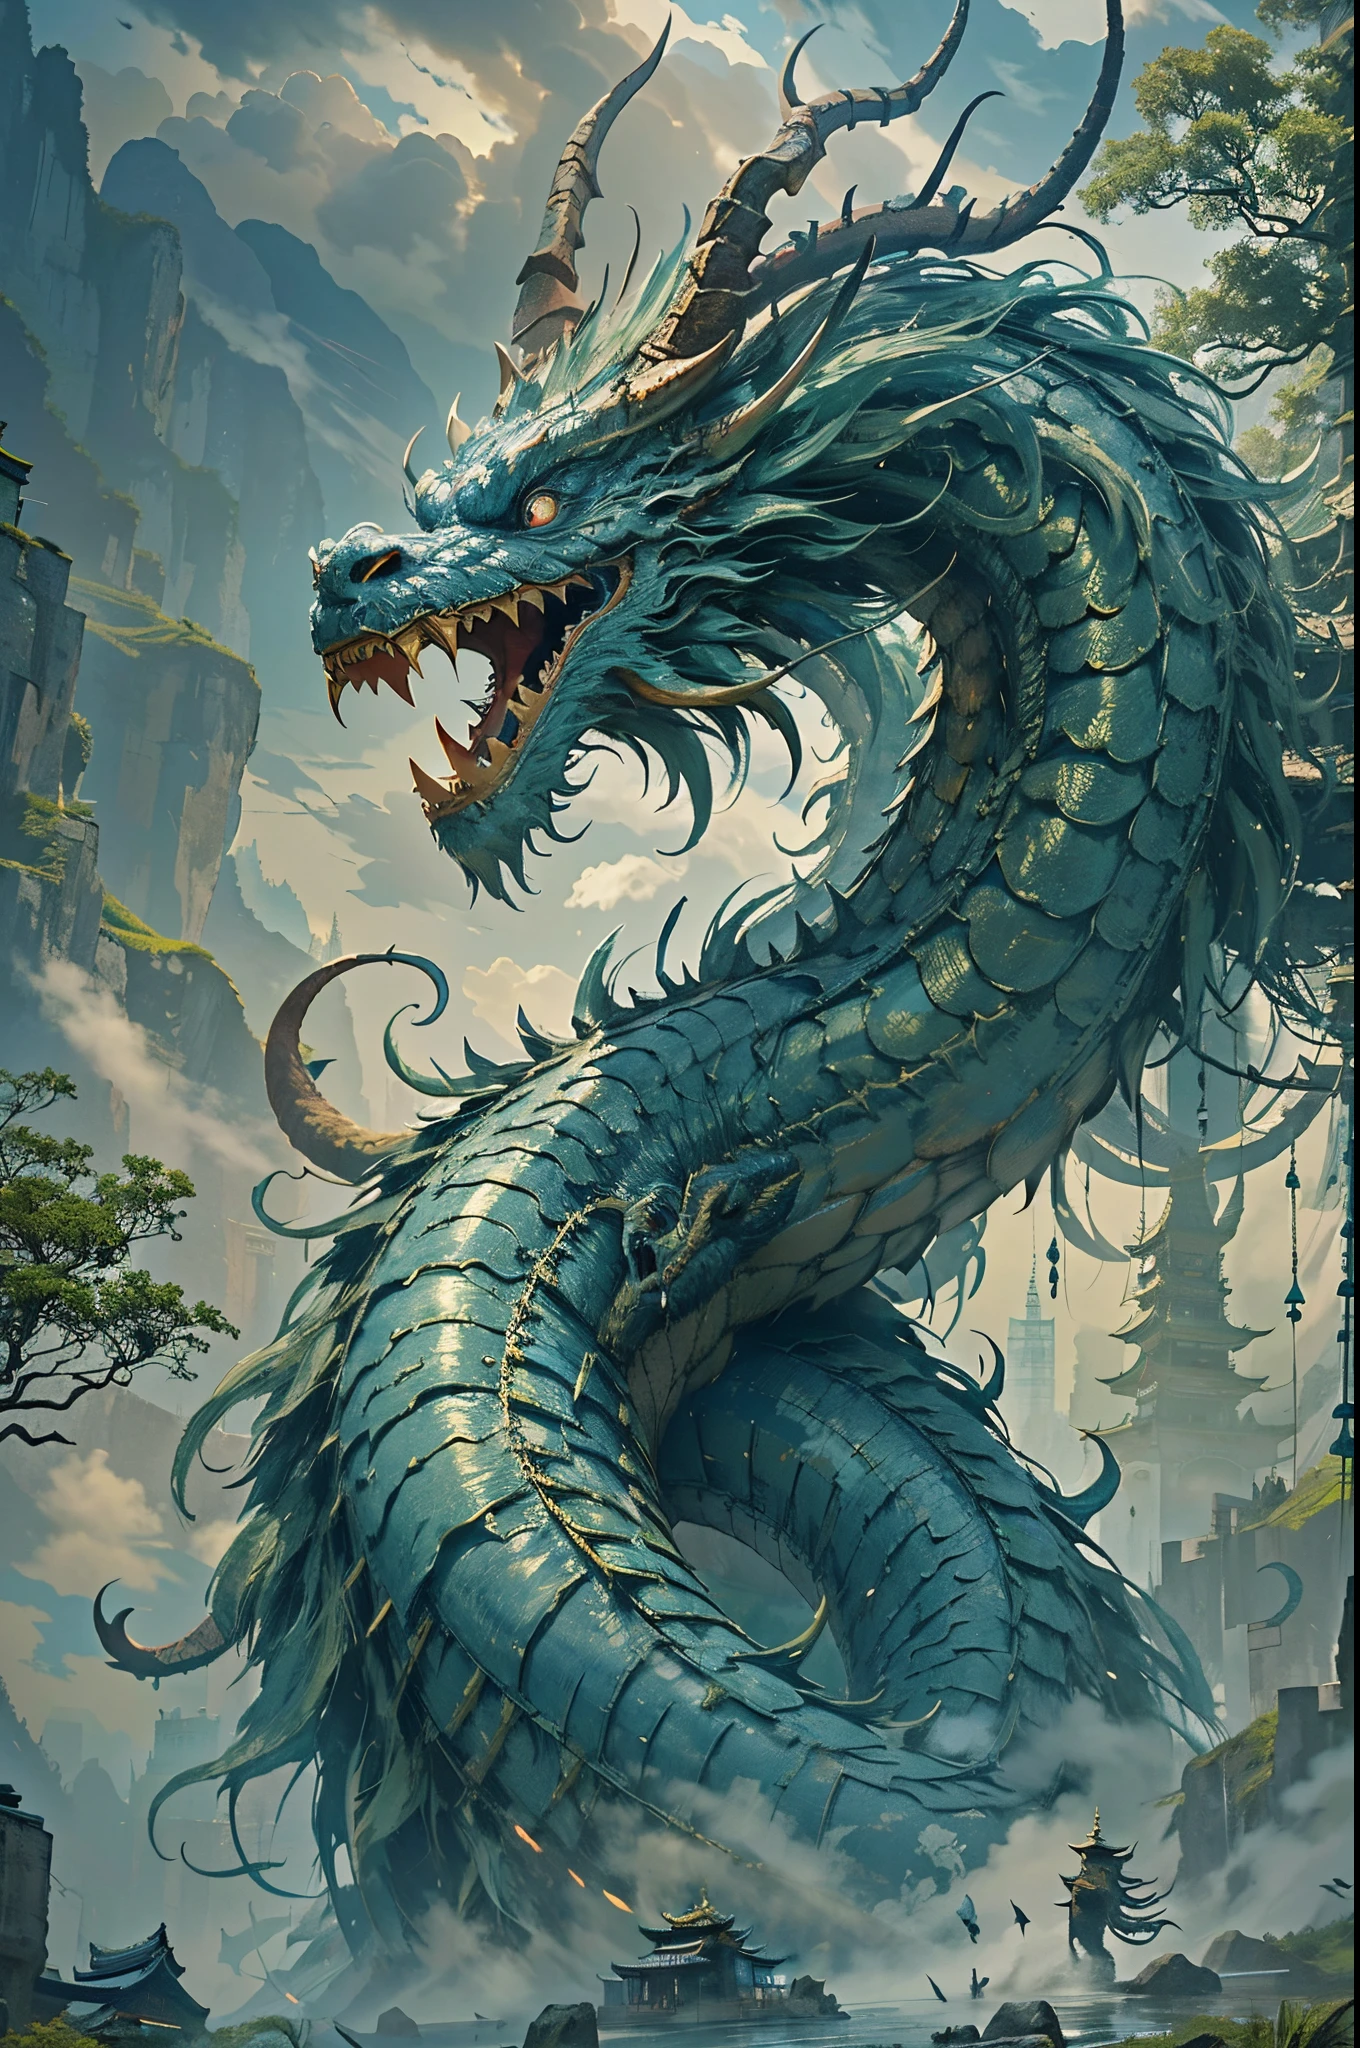 chinese dragon concept art, smooth chinese dragon, Portrait of a cyborg dragon, mythological creatures, Chinese Dragon, ultra detailed Digital art, great digital art with details, dragon portrait, cyan chinese dragon fantasy